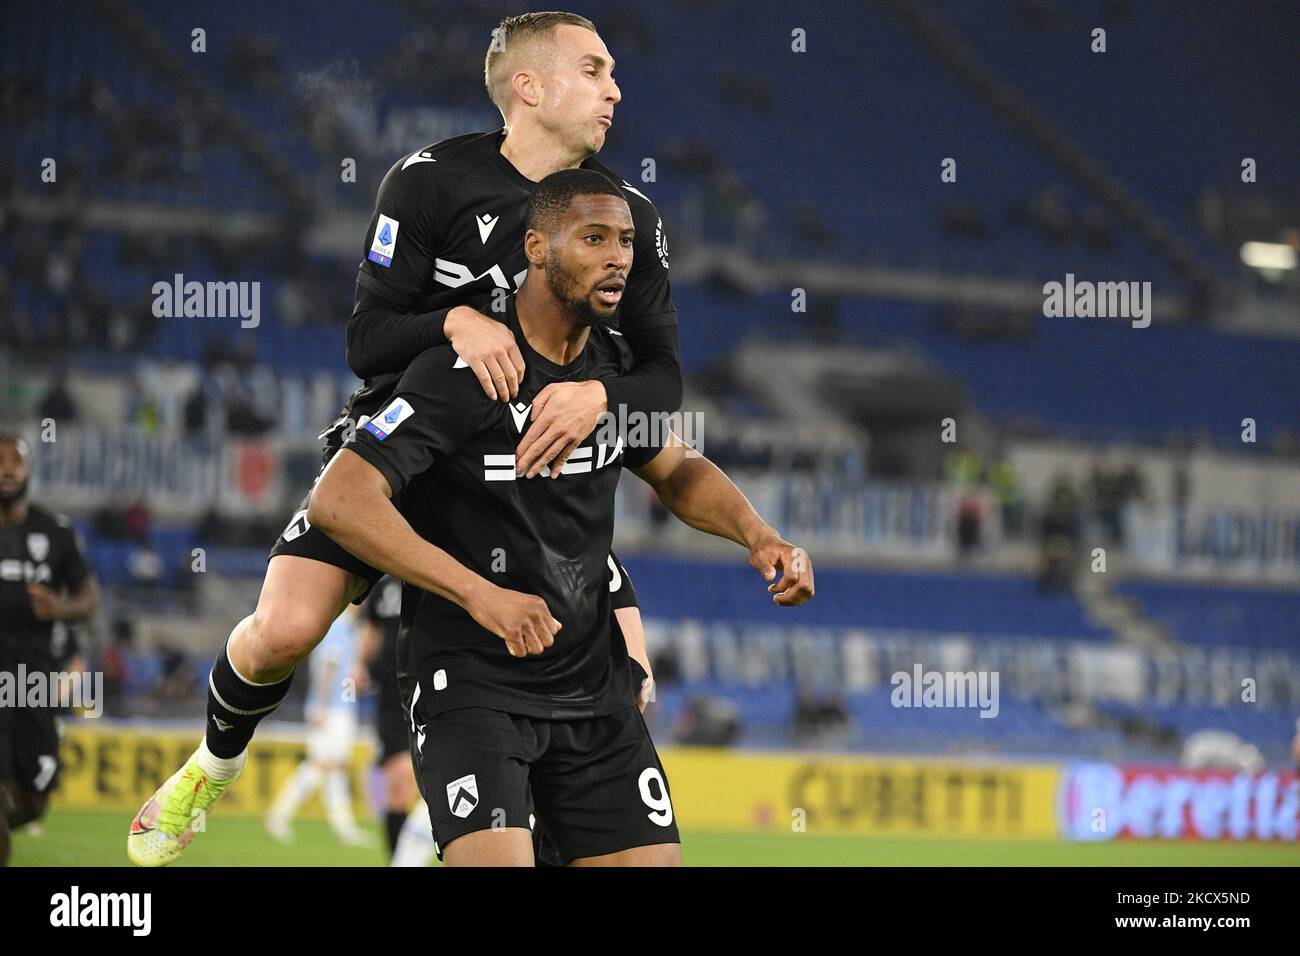 Norberto Bercique Gomes Betuncal (Udinese) celebrates after scoring the goal 0-1 during the Italian Football Championship League A 2021/2022 match between SS Lazio vs Udinese Calcio at the Olimpic Stadium in Rome on 02 December 2021. (Photo by Fabrizio Corradetti/LiveMedia/NurPhoto) Stock Photo